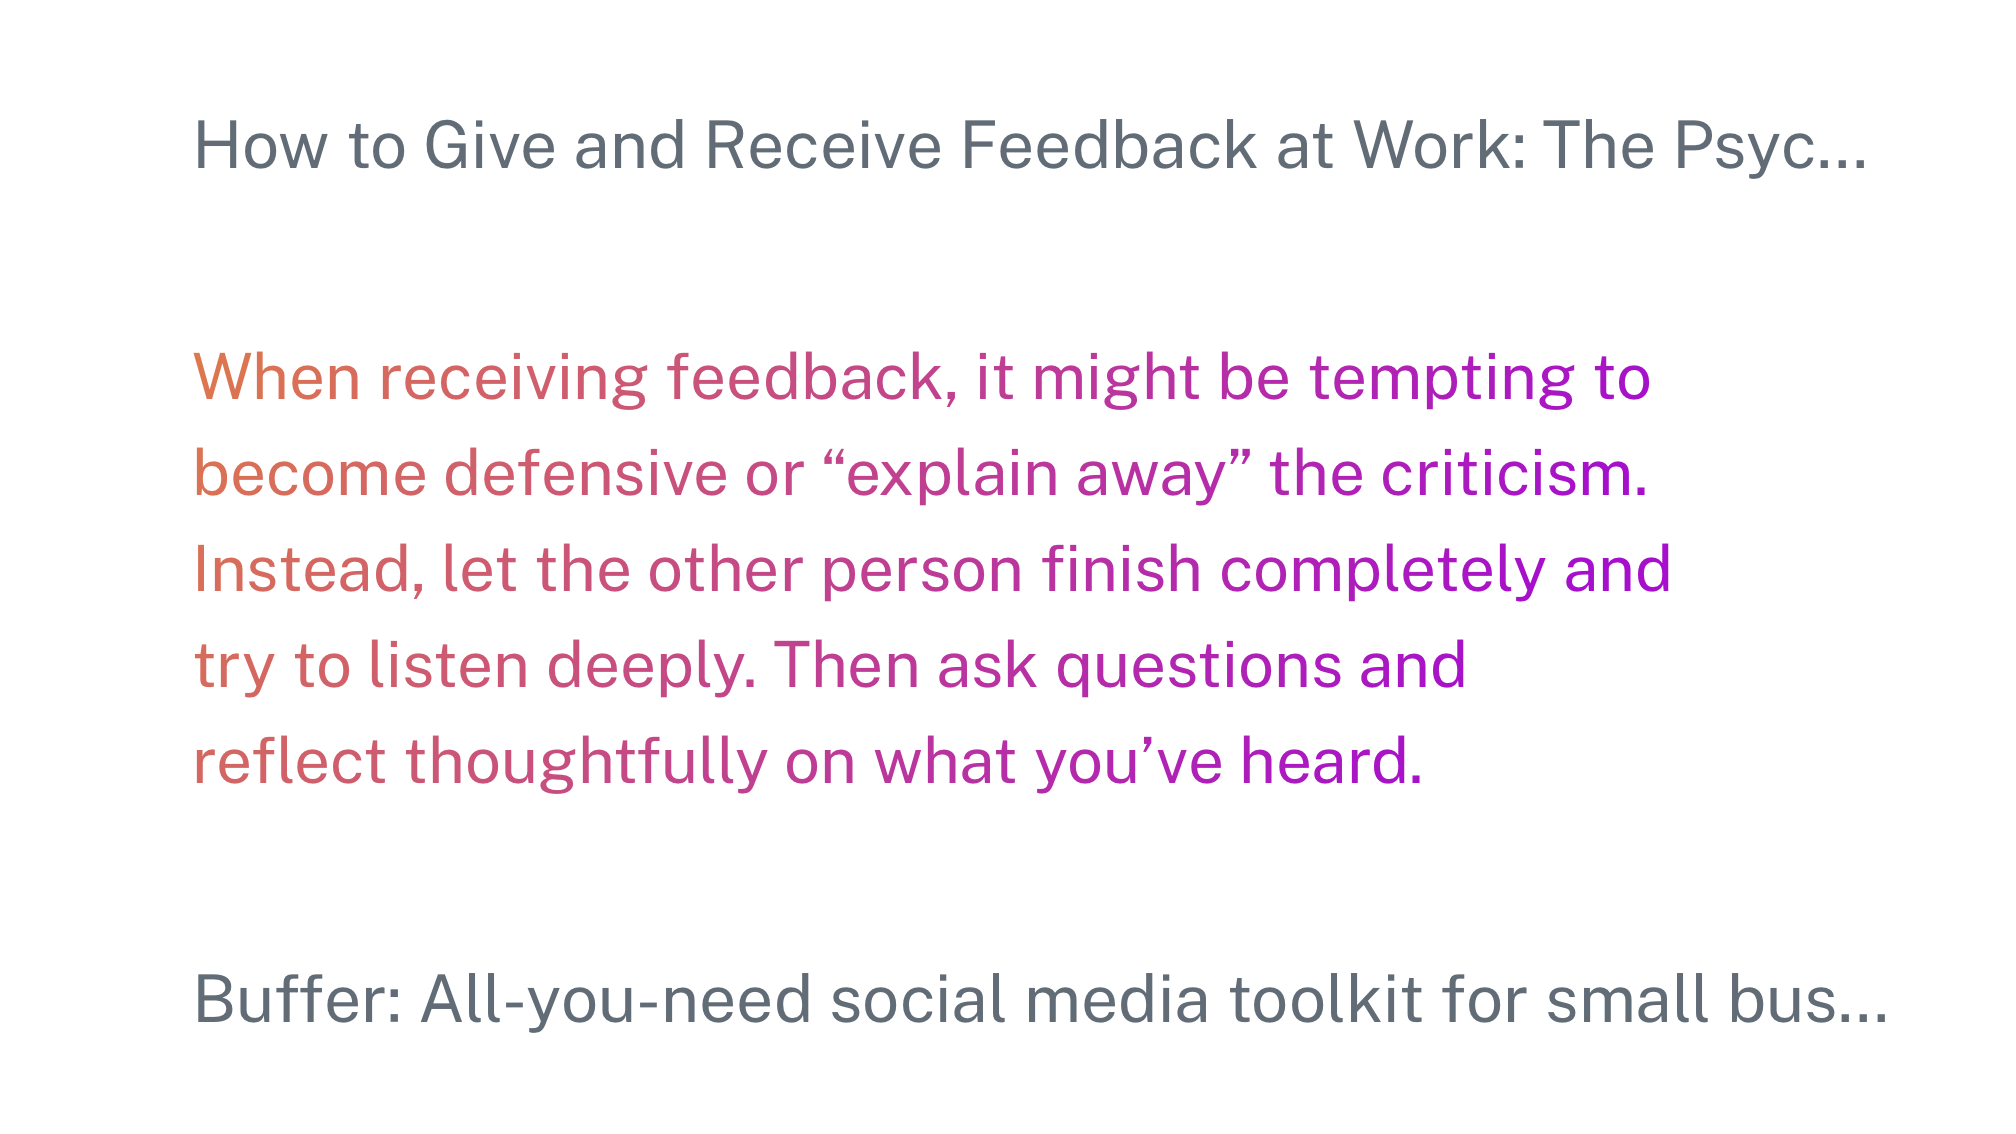 An image of a quote from Courtney. It says: "When receiving feedback, it might be tempting to become defensive or 'explain away' the criticism."